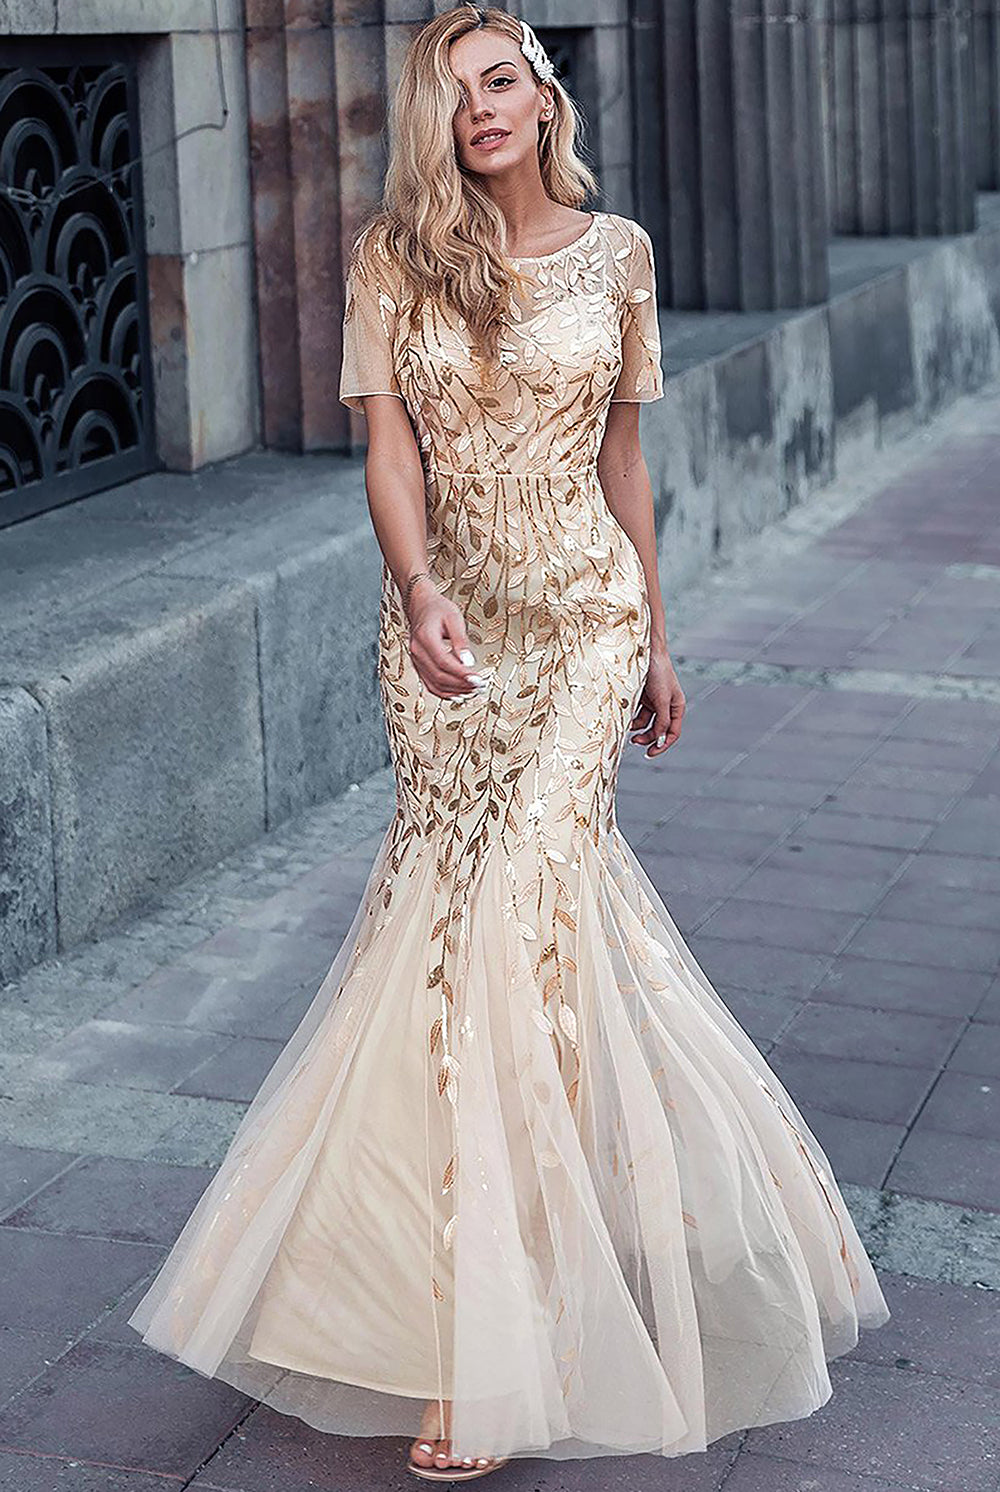 Embroidered Lace Mermaid Long Prom & Mother Of The Bride Dress AC7707-Prom Dress-smcfashion.com